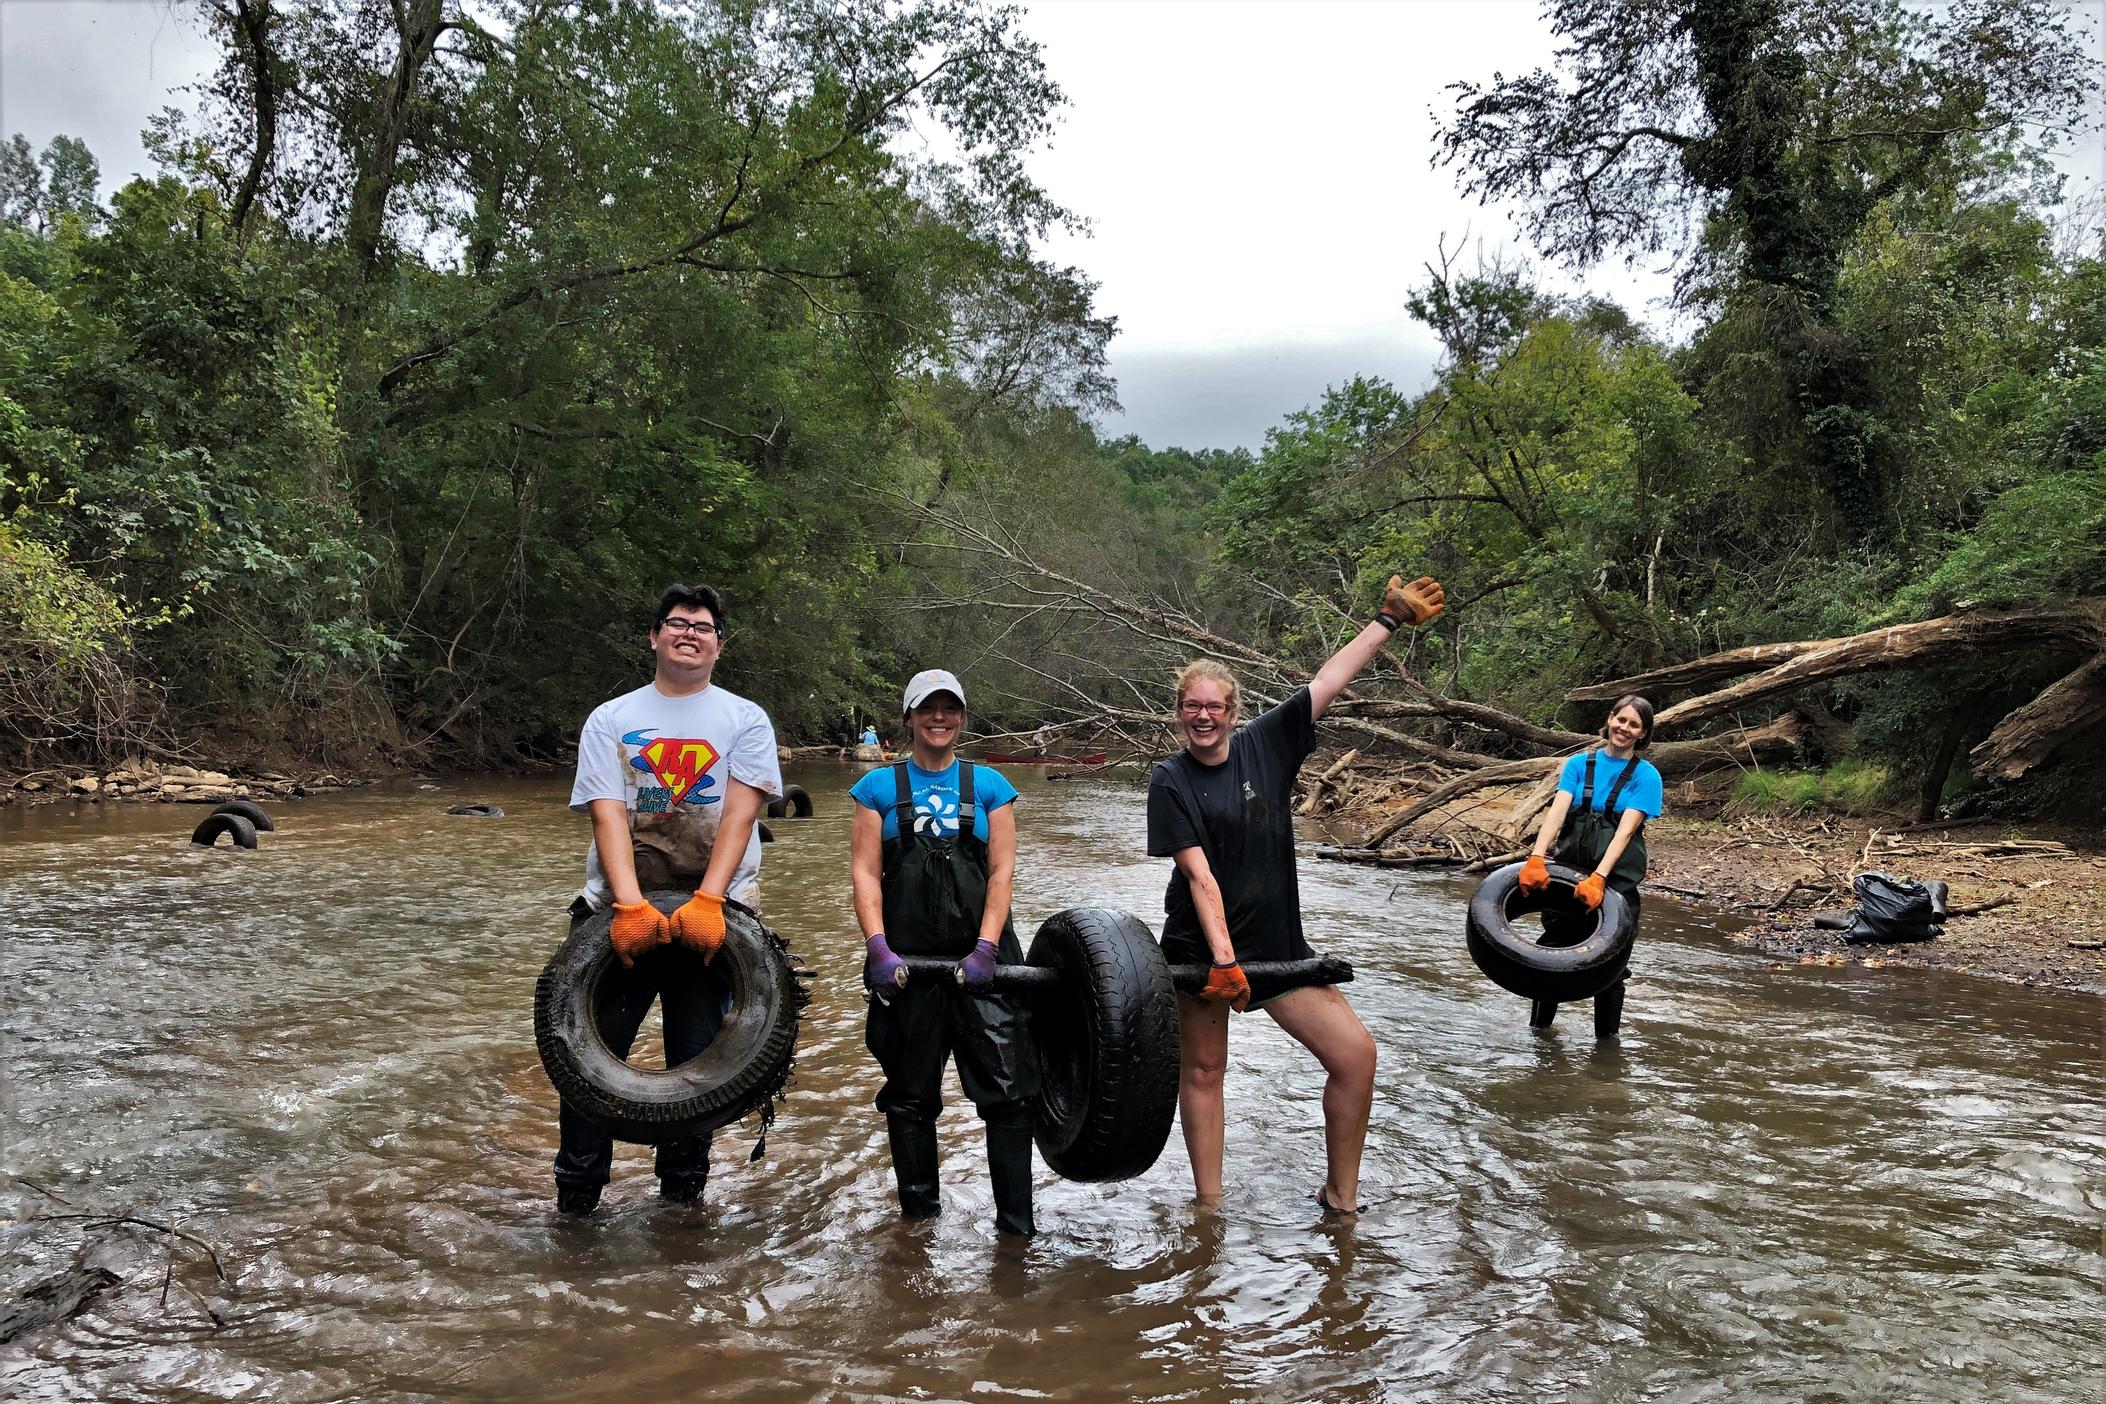 Volunteers in stream with tires